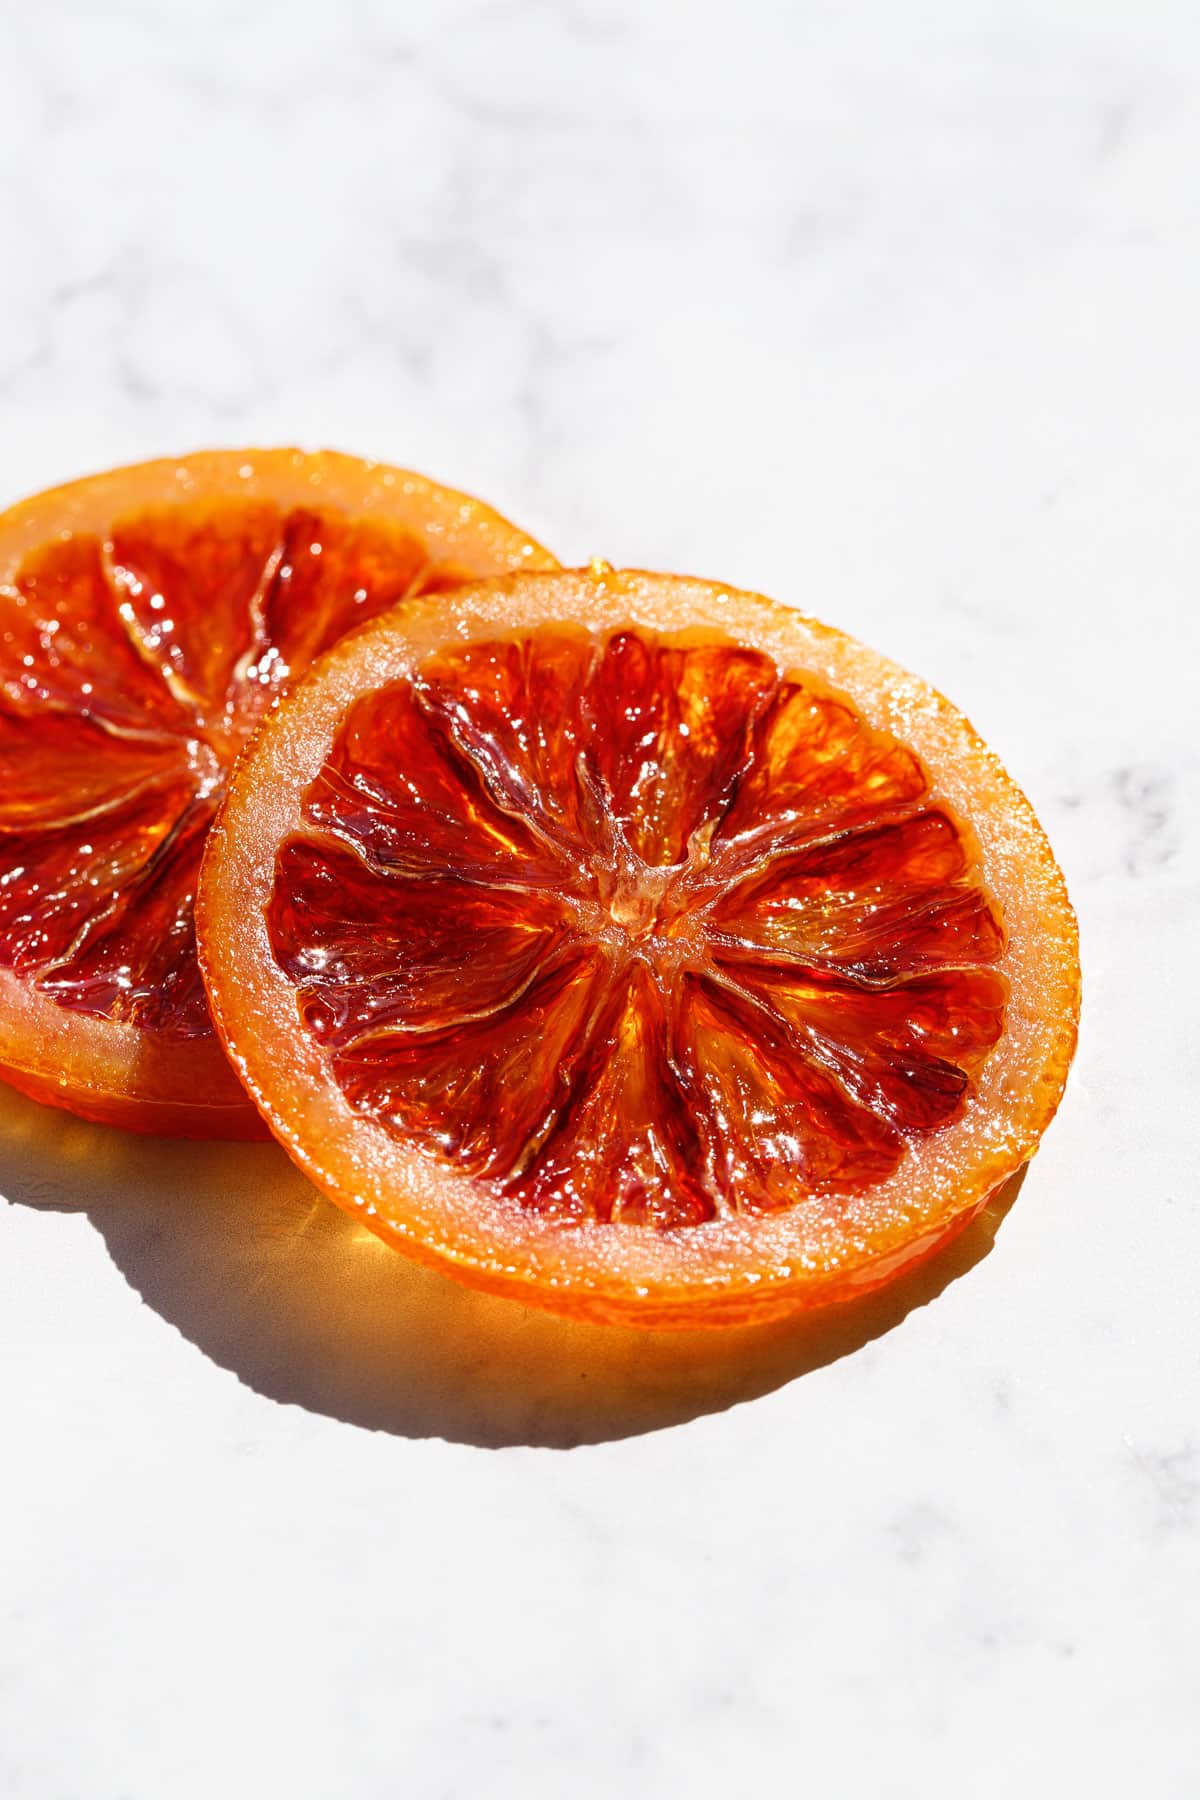 Two slices of Candied Blood Orange Slices in direct light on a marble background.